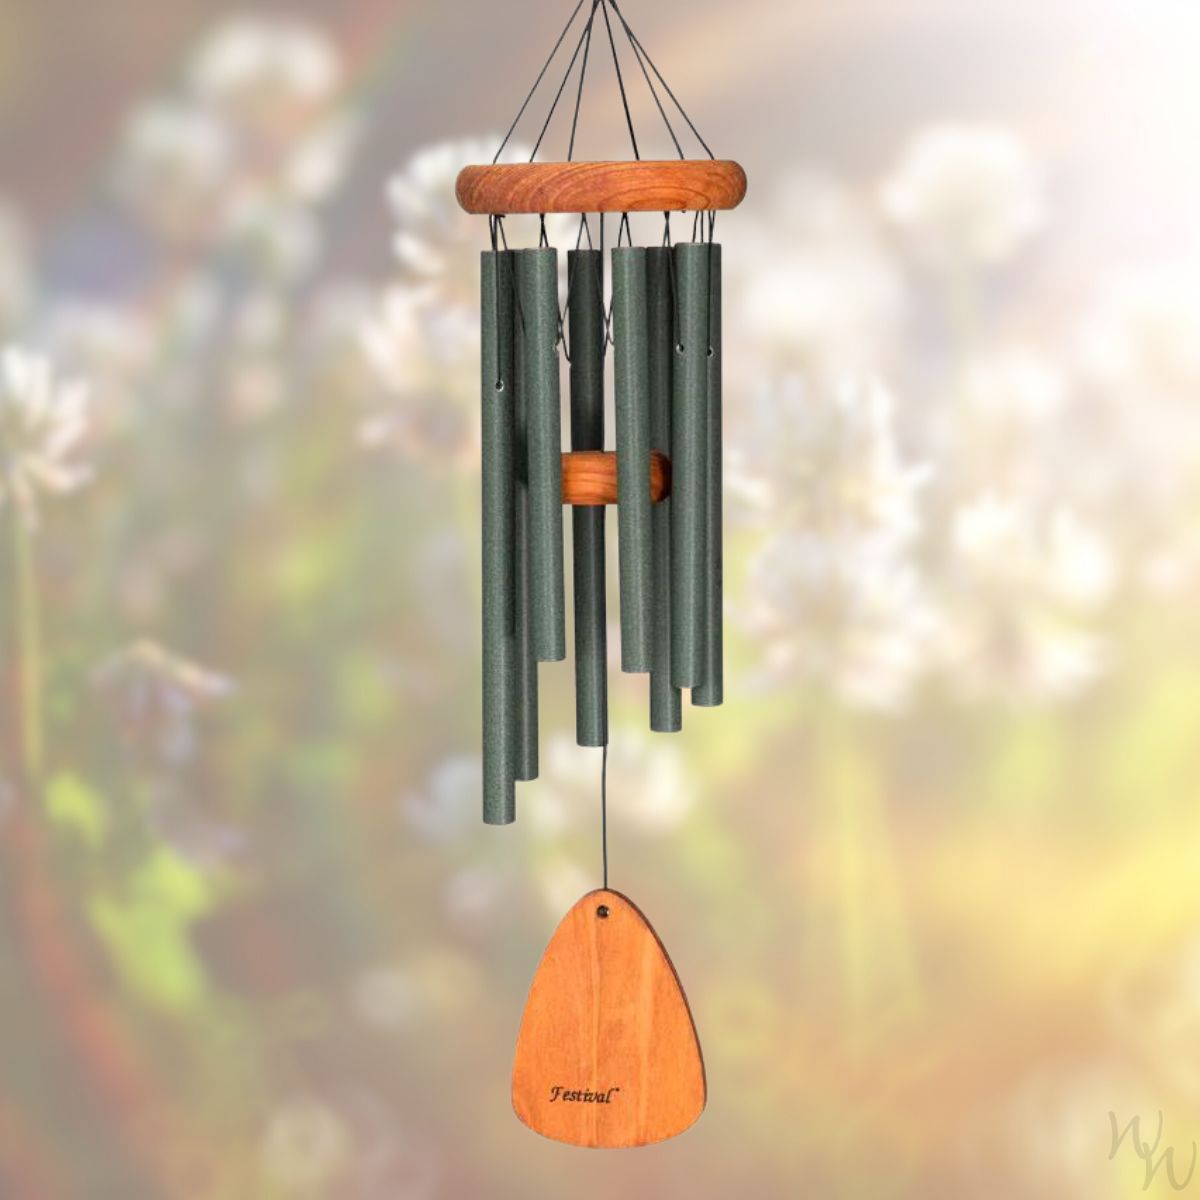 Festival 24-inch 8-Tube Wind chime in Forest Green